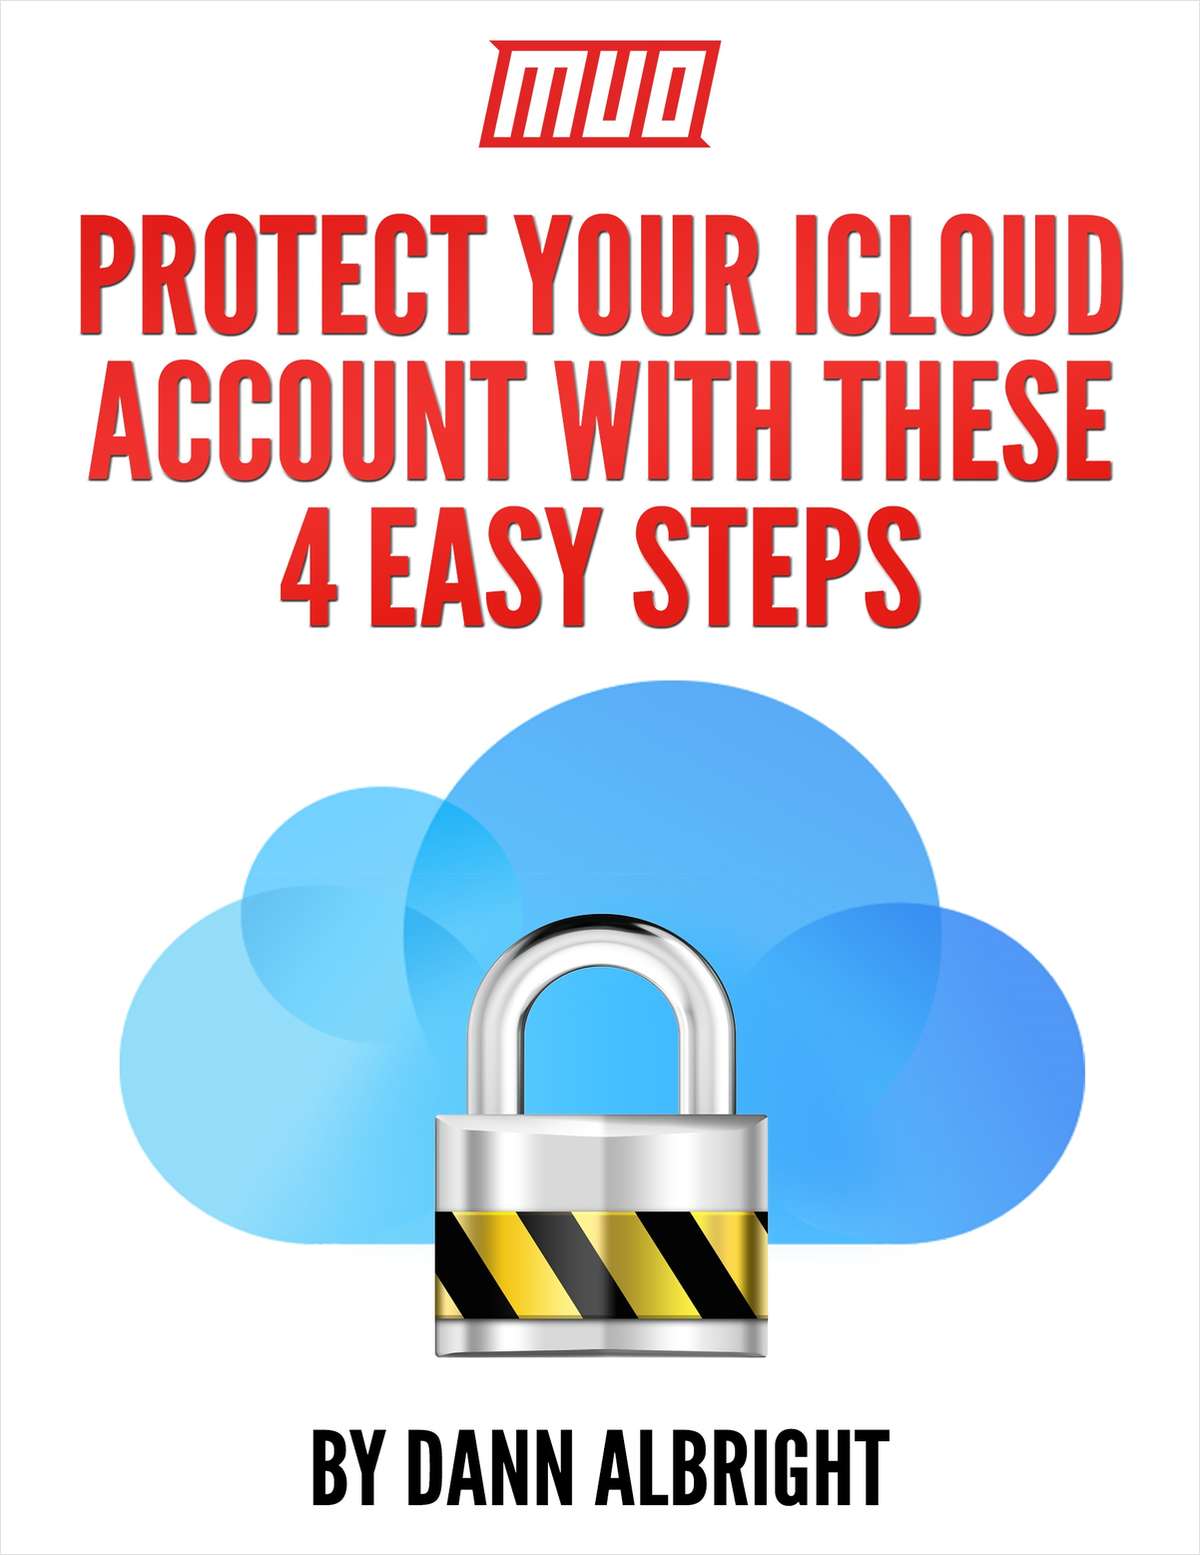 Protect Your iCloud Account With These 4 Easy Steps